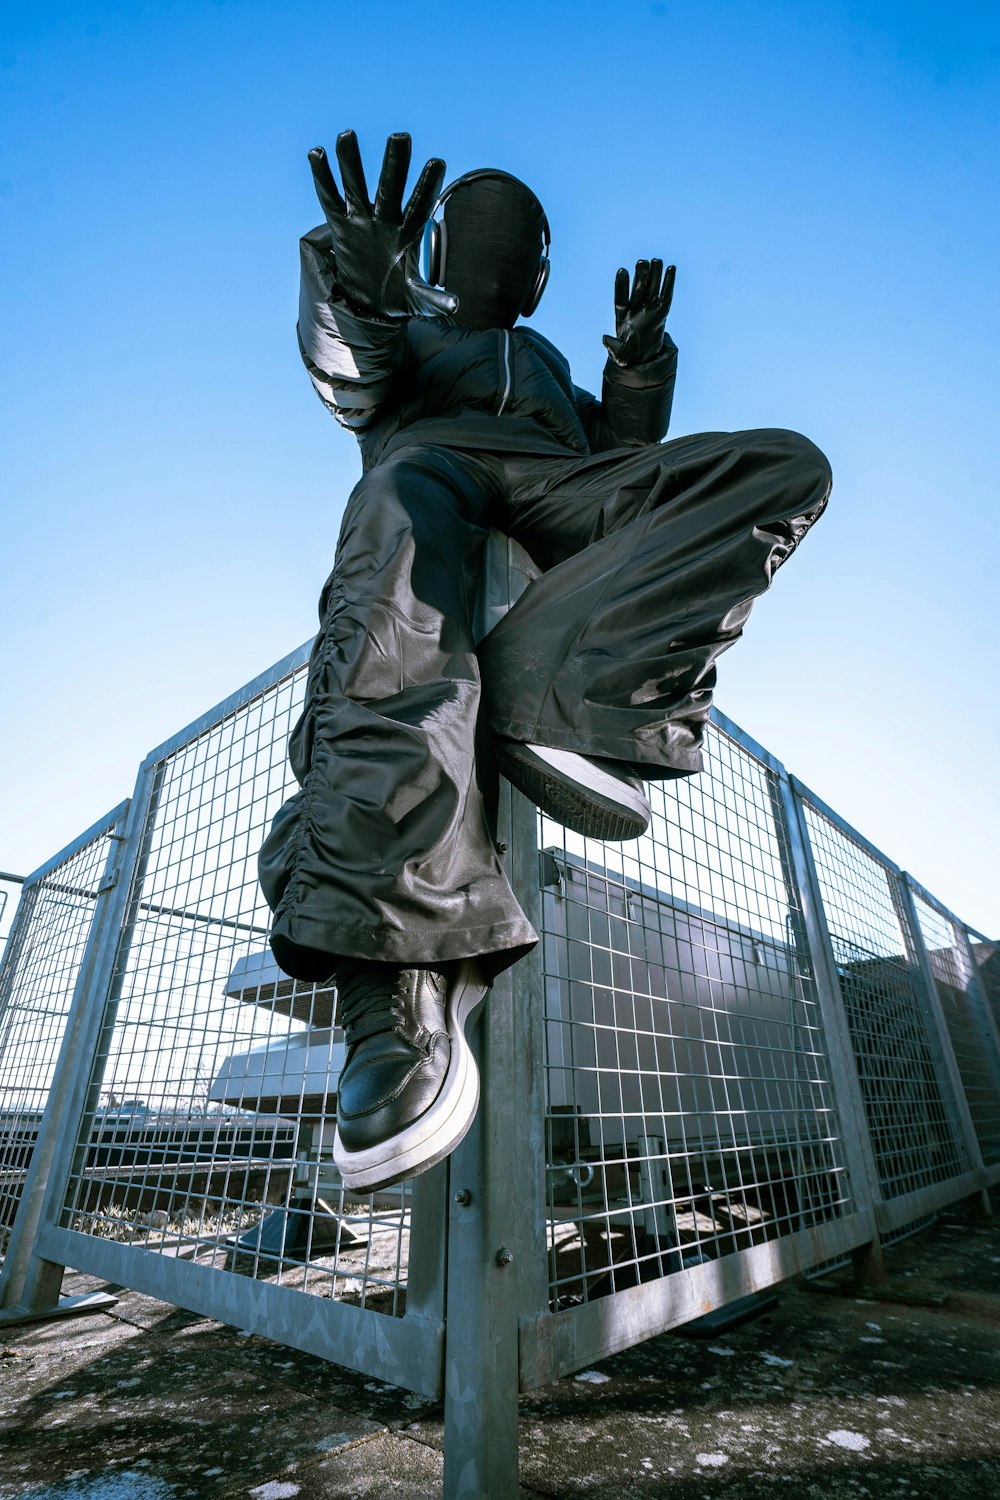 a statue of a person on a metal pole